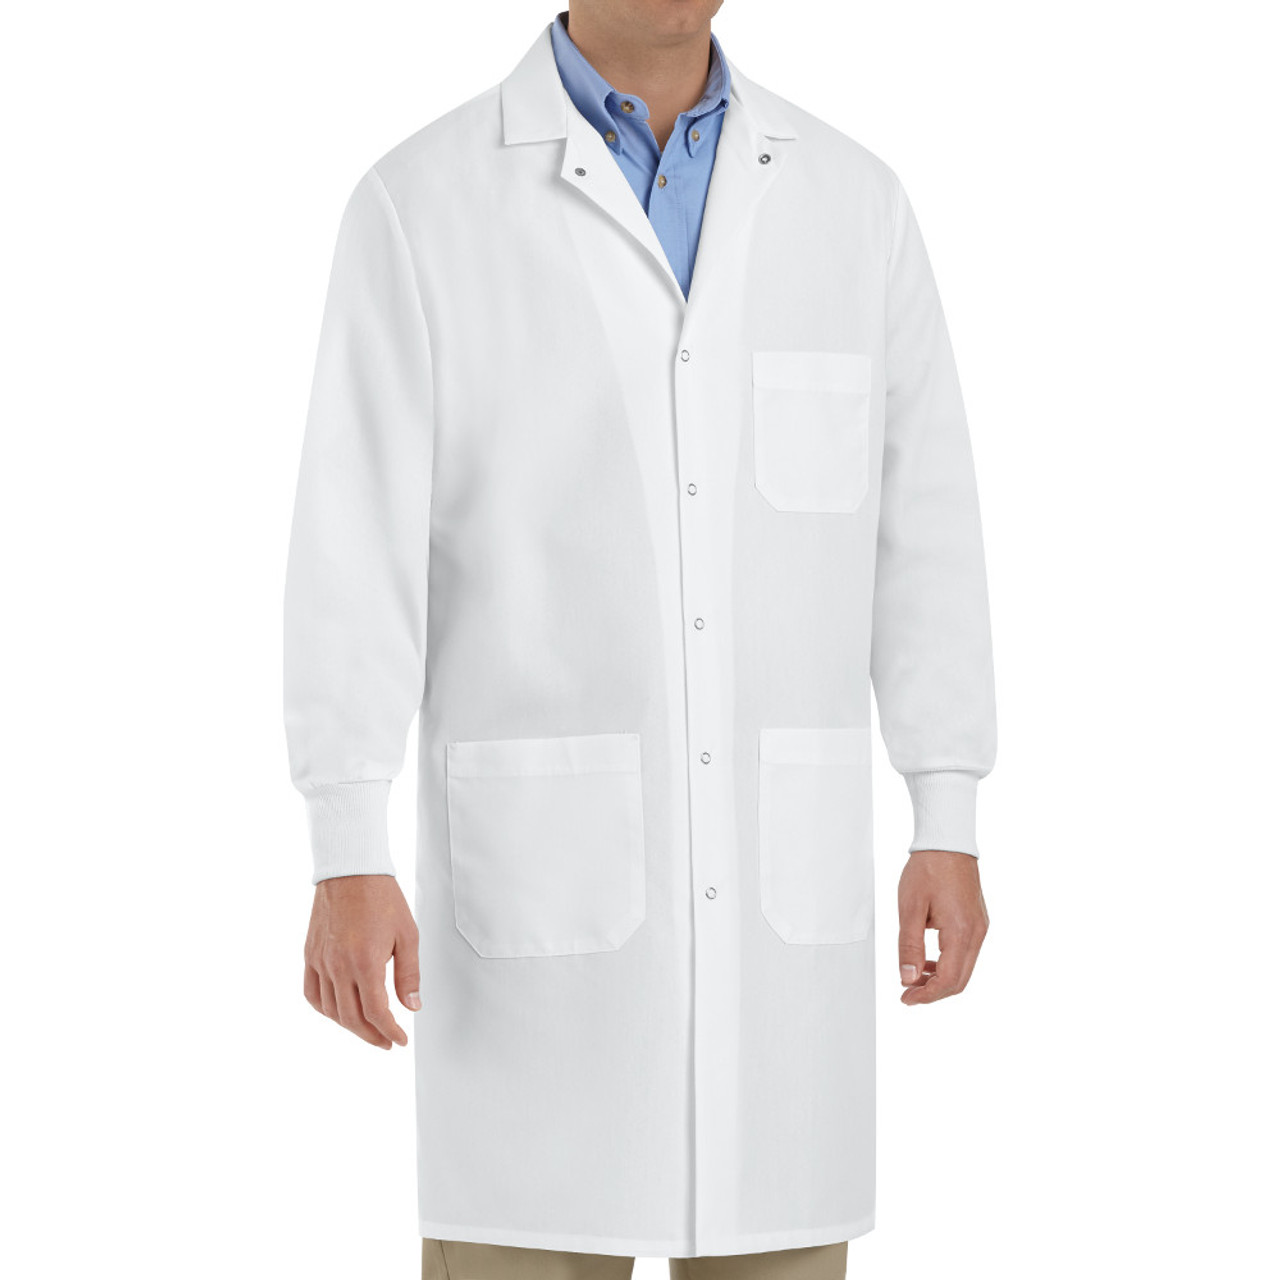 red lab coats for women